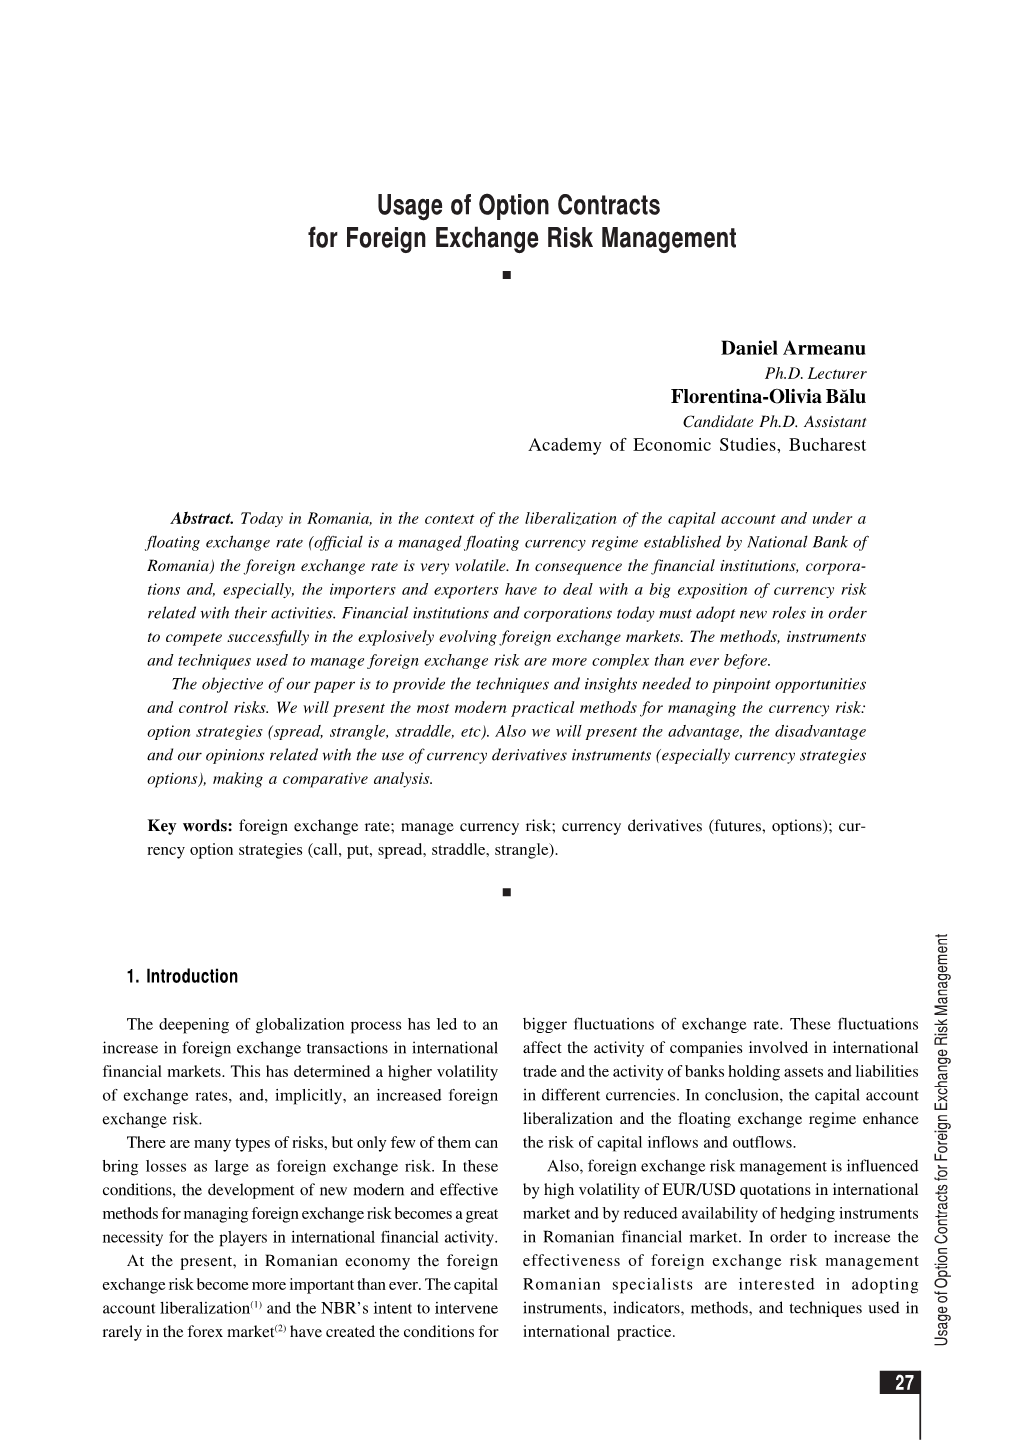 Usage of Option Contracts for Foreign Exchange Risk Management